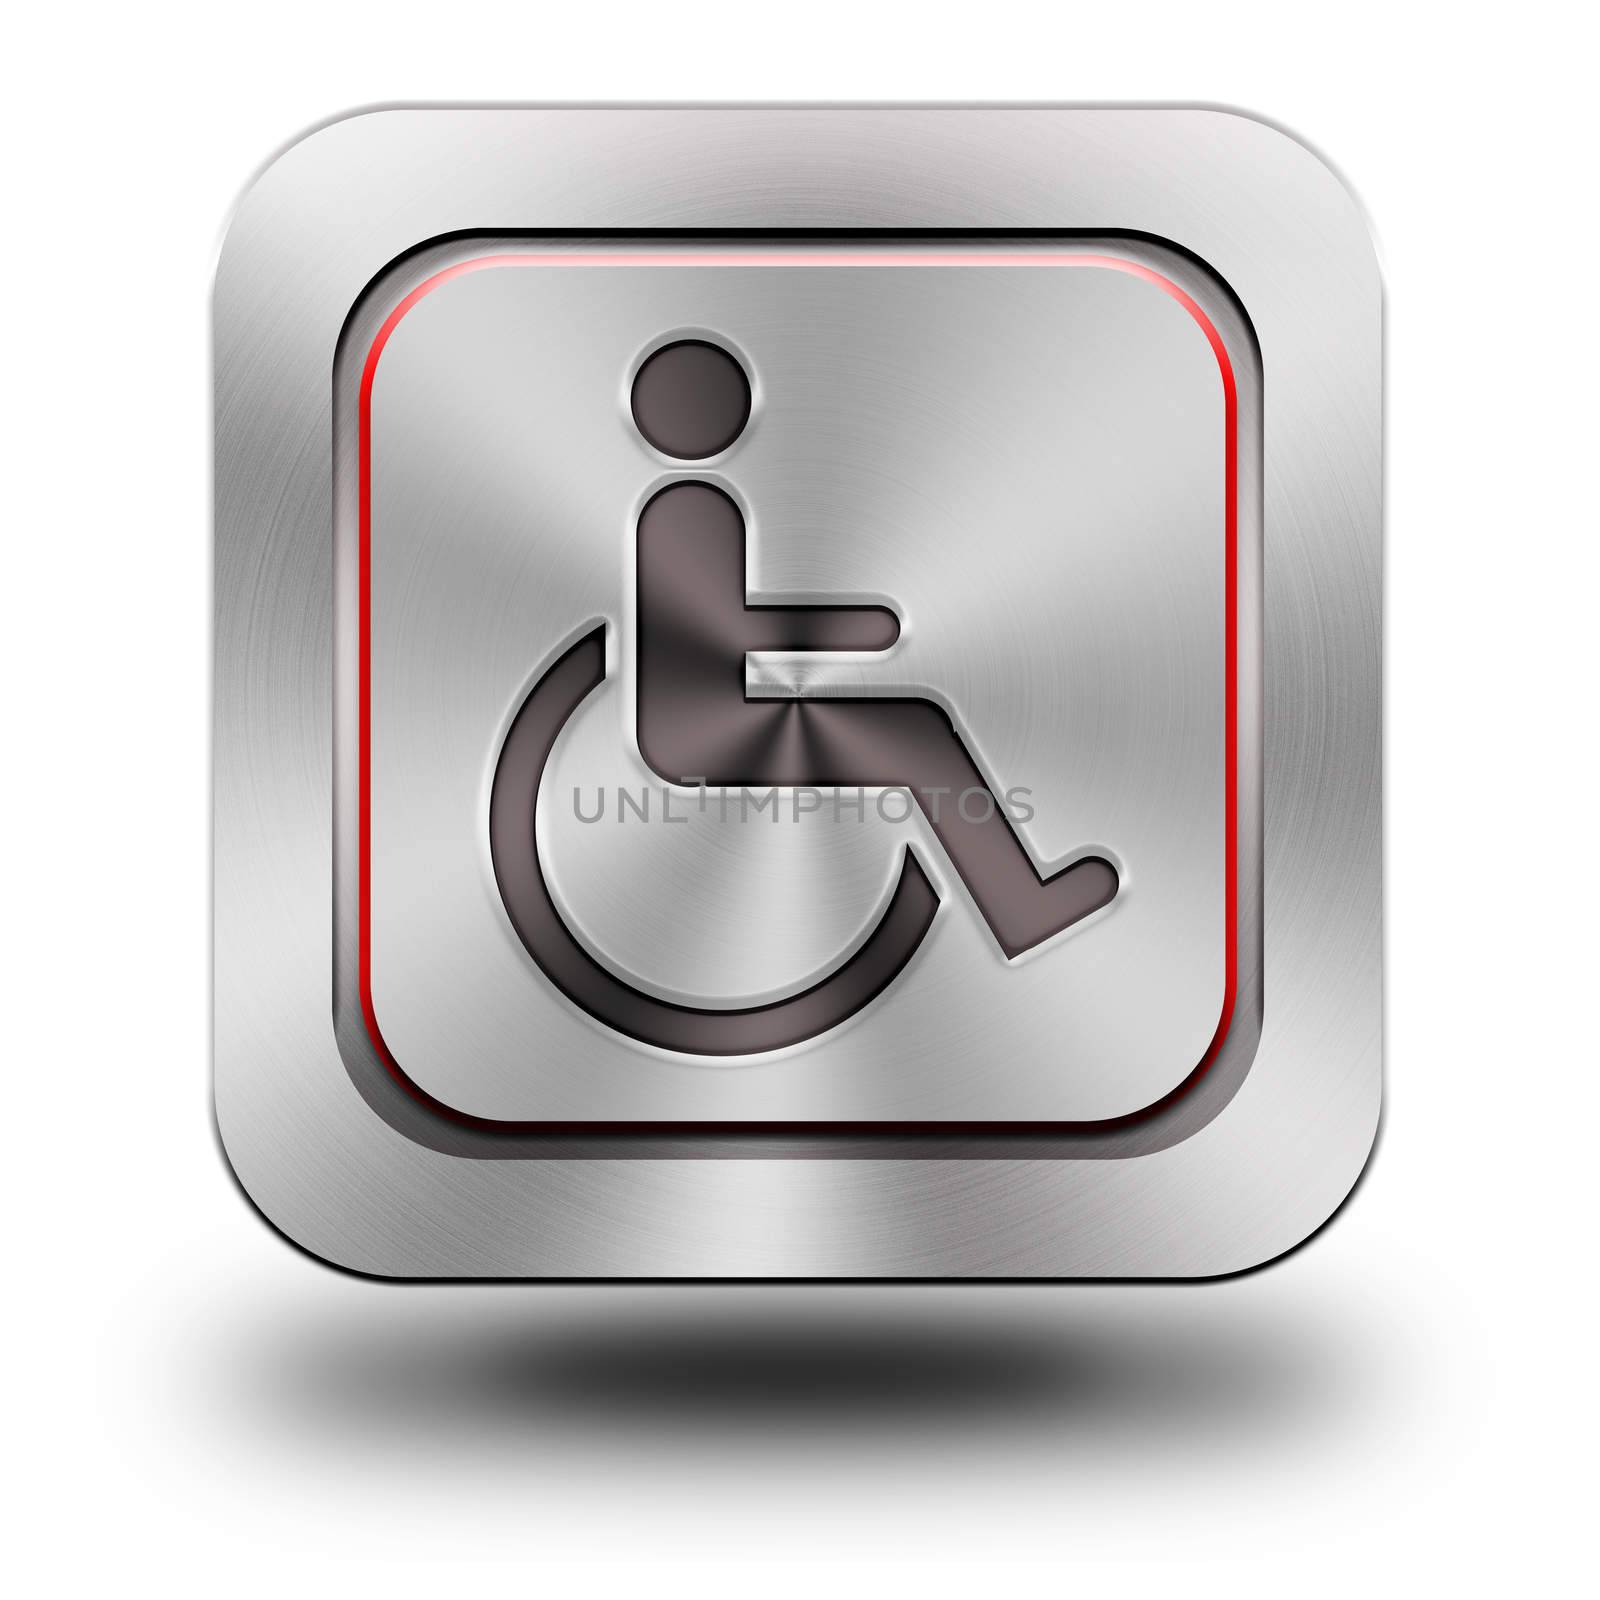 Accessibilit, aluminum or steel, chromium, glossy, icon, button, sign, icons, buttons, crazy colors